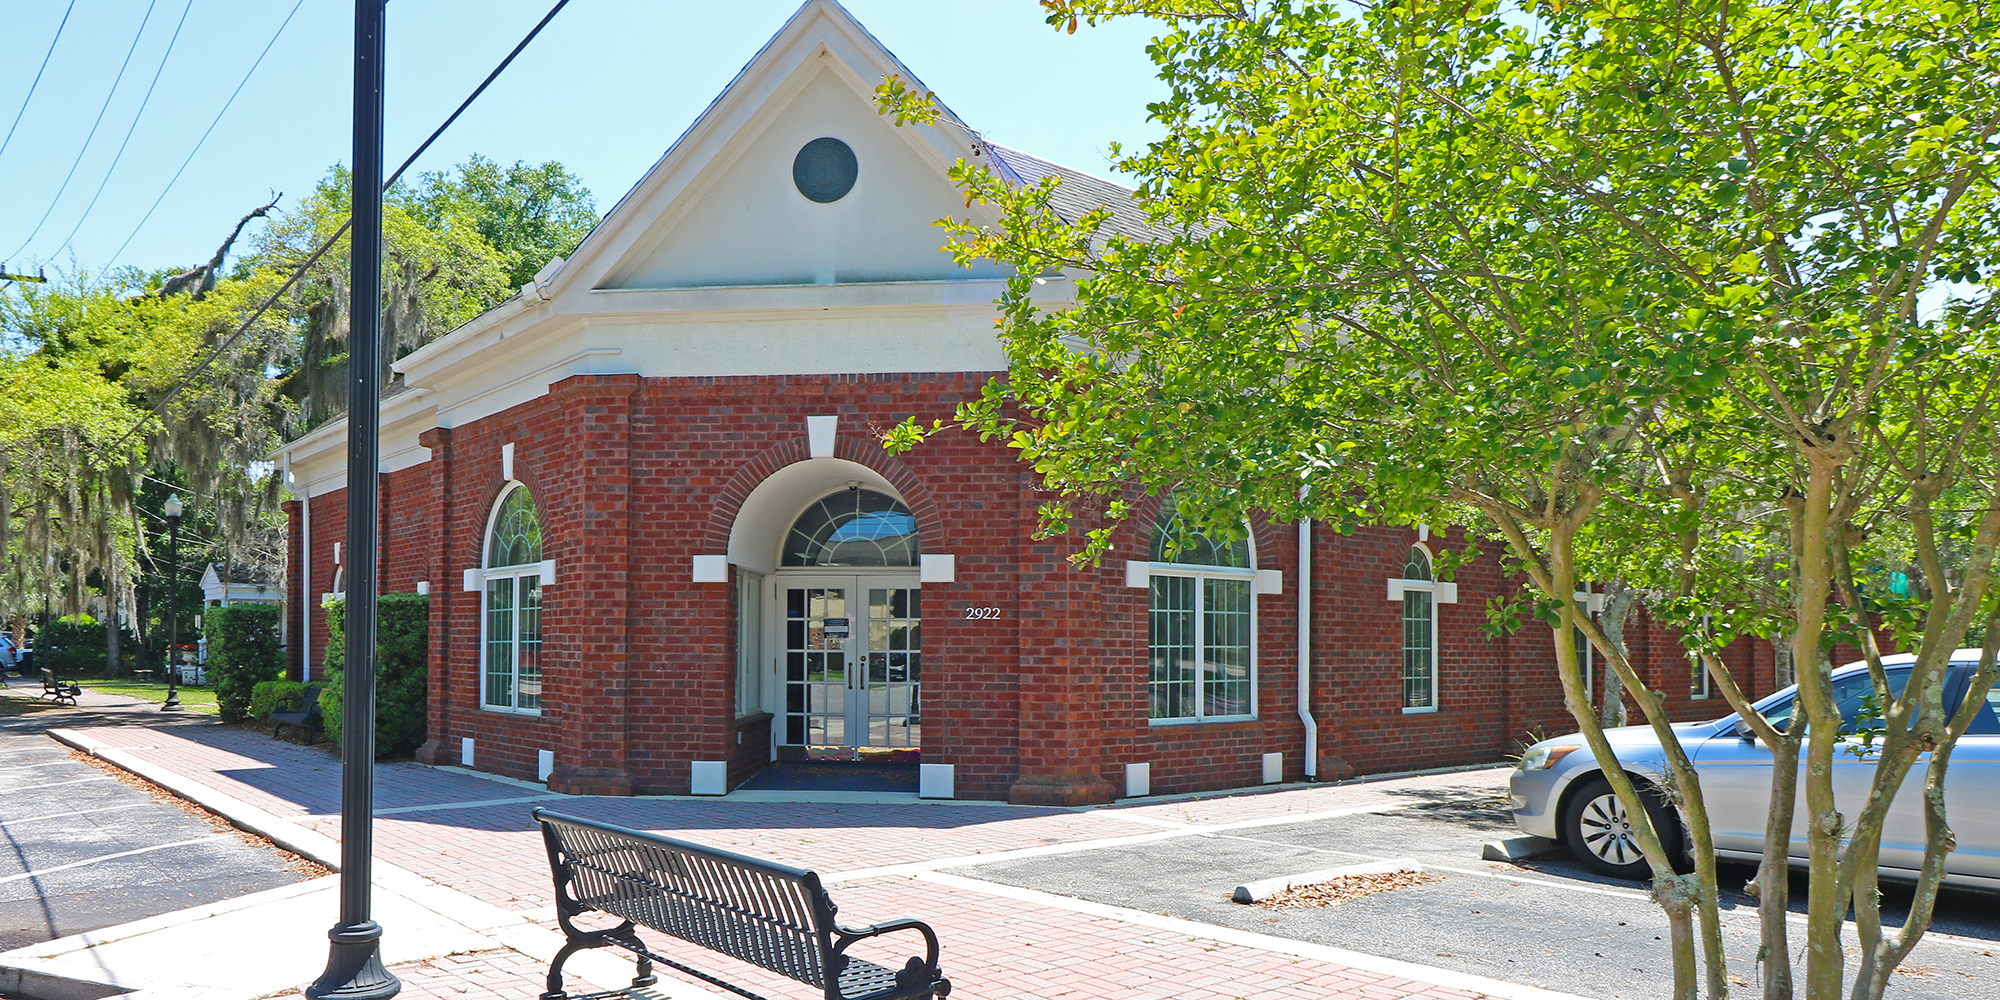 The former CenterState Bank branch at 2922 Corinthian Ave.